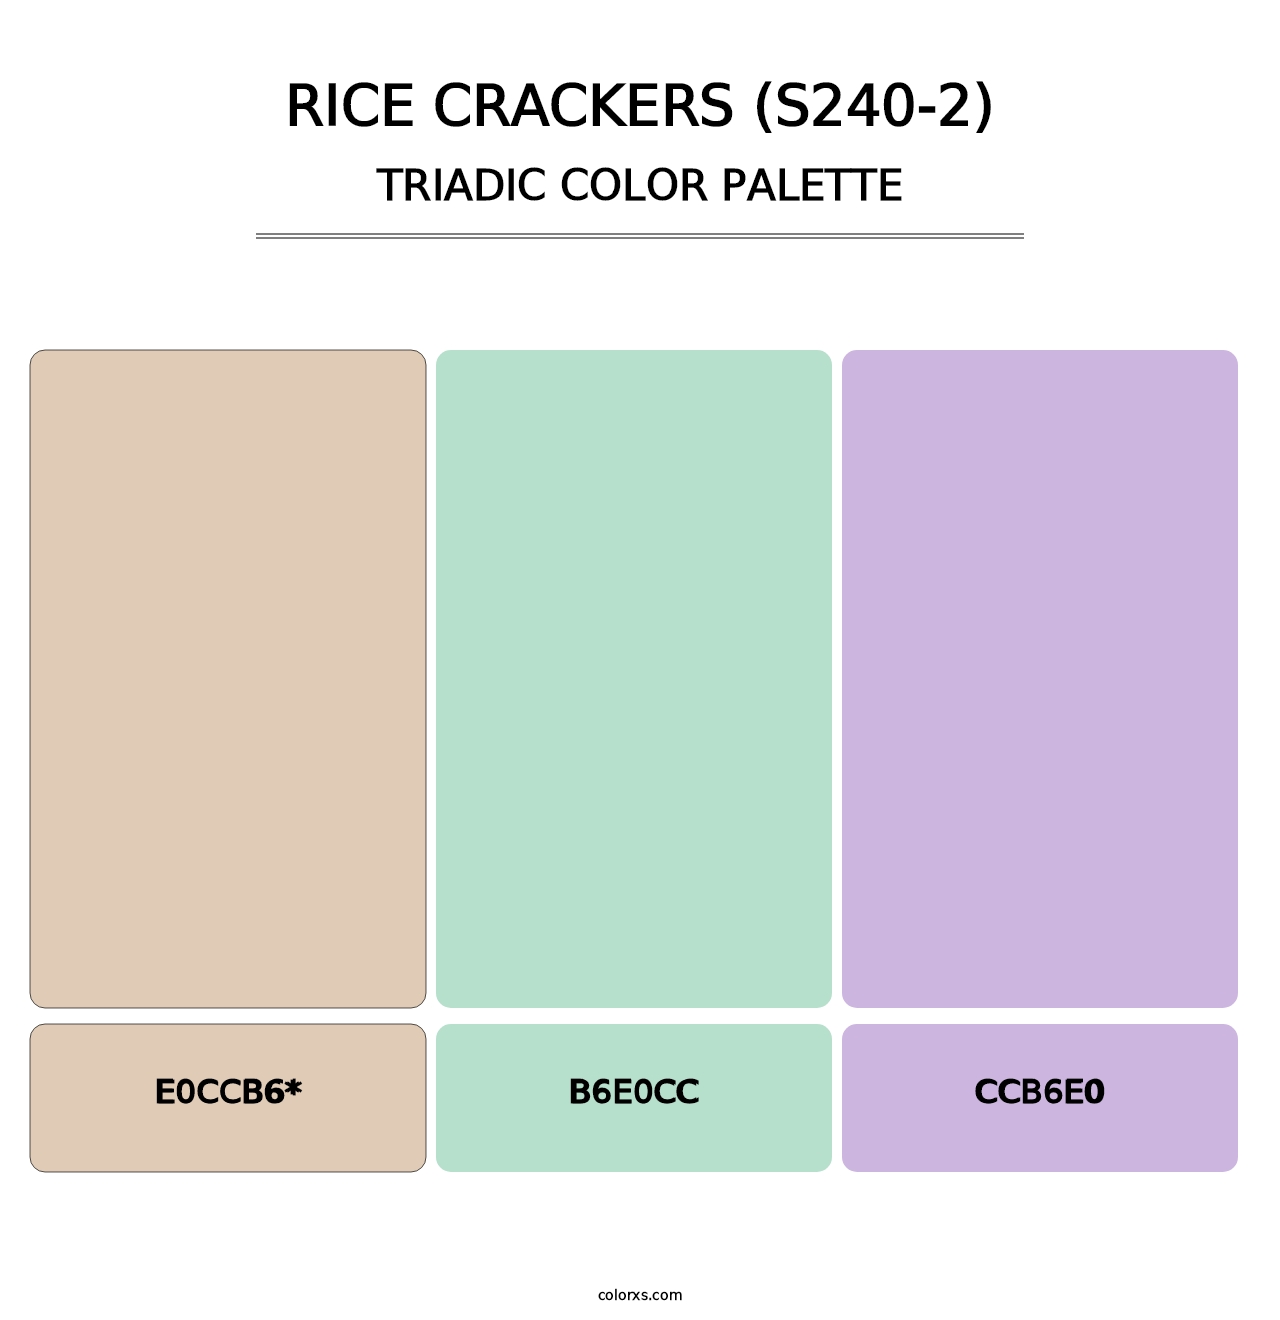 Rice Crackers (S240-2) - Triadic Color Palette